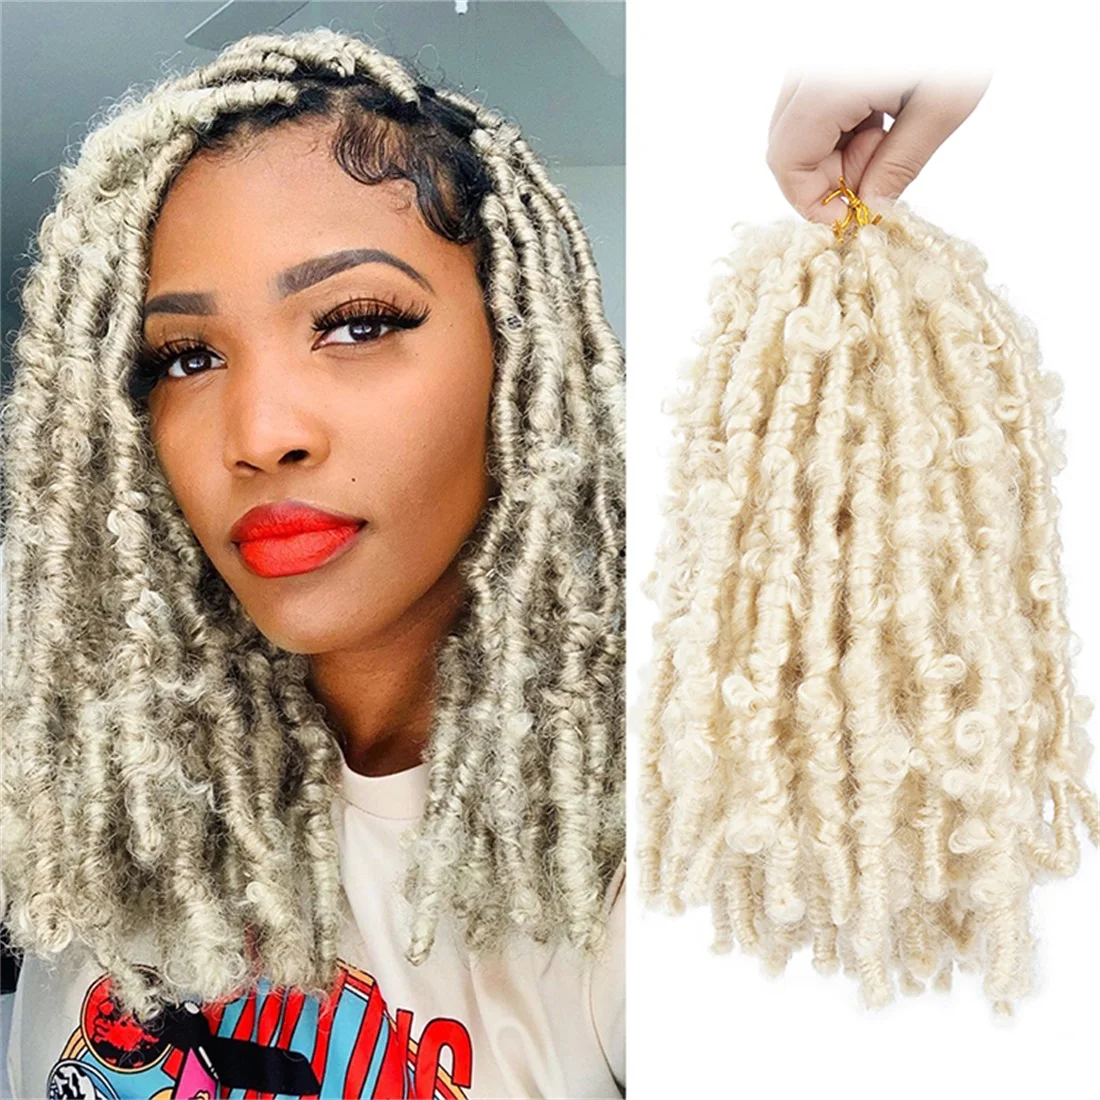 

12 Inch 613 Blonde Synthetic Butterfly Faux Locs Crochet Braids Hair Extensions For Women 20 Strands Natural Black Braiding Hair